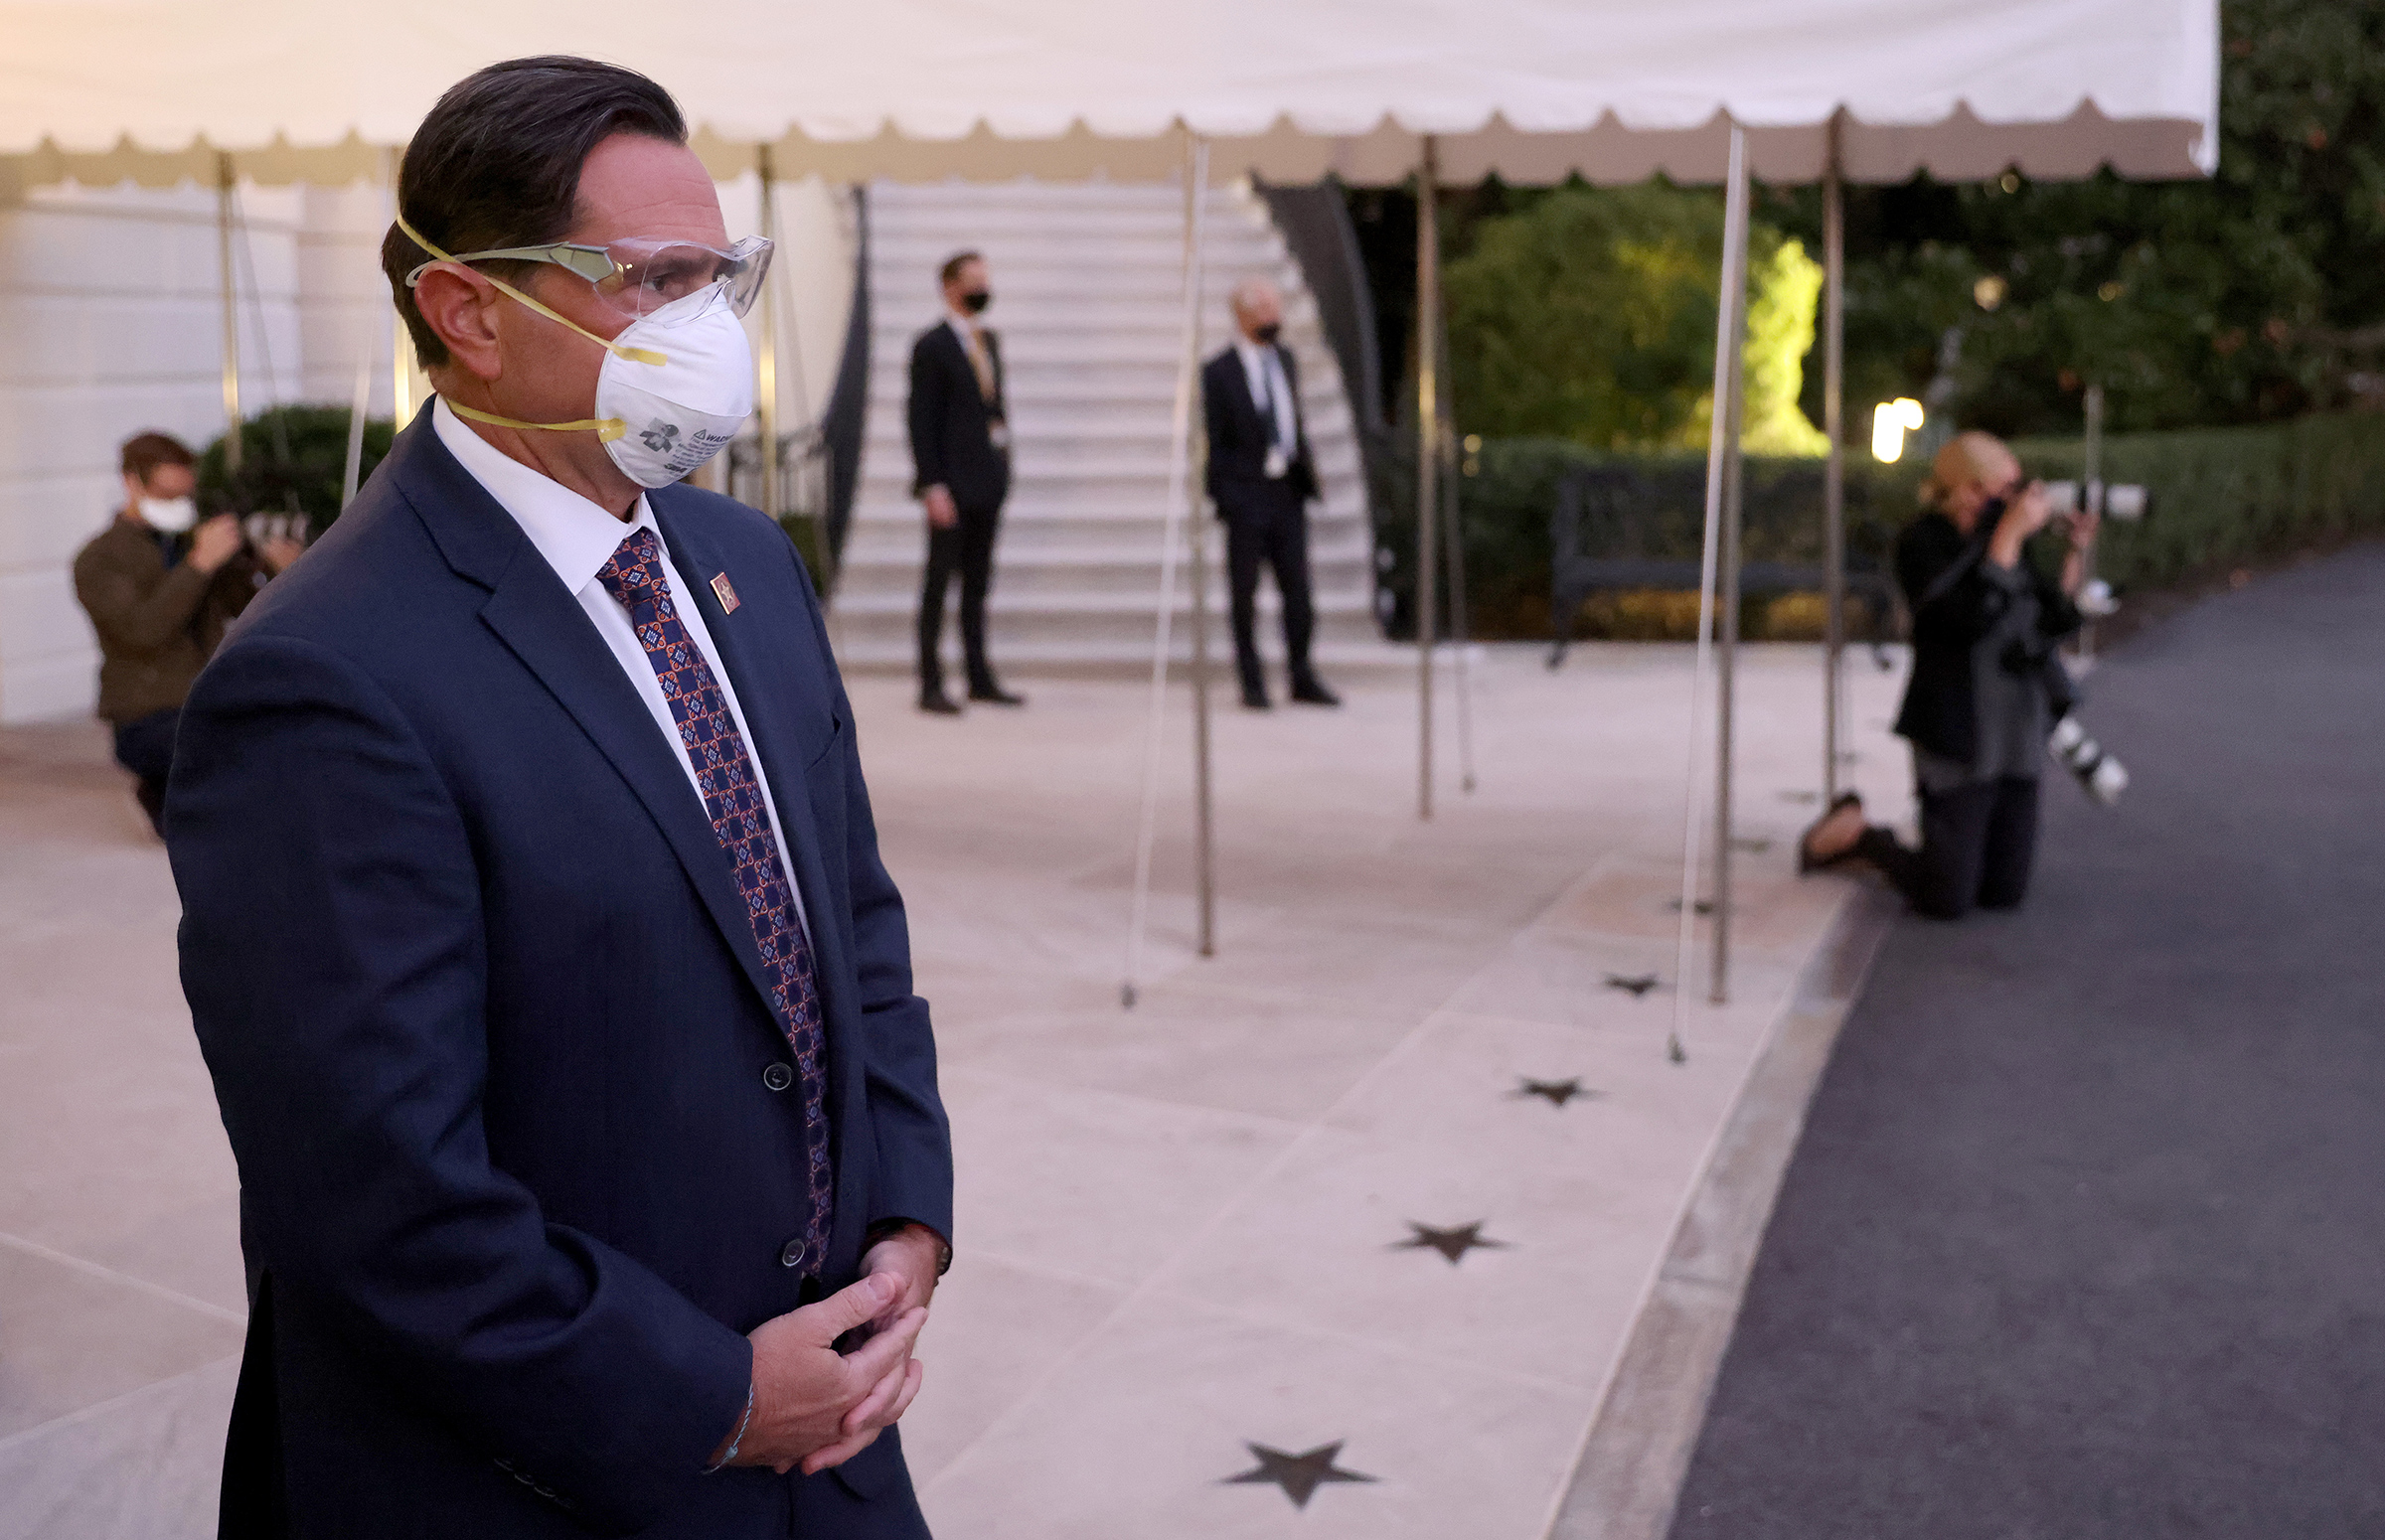 U.S. Service members wear masks and eye protection before President Trump's return to the White House from Walter Reed National Military Medical Center on Oct. 05 (Win McNamee—Getty Images)